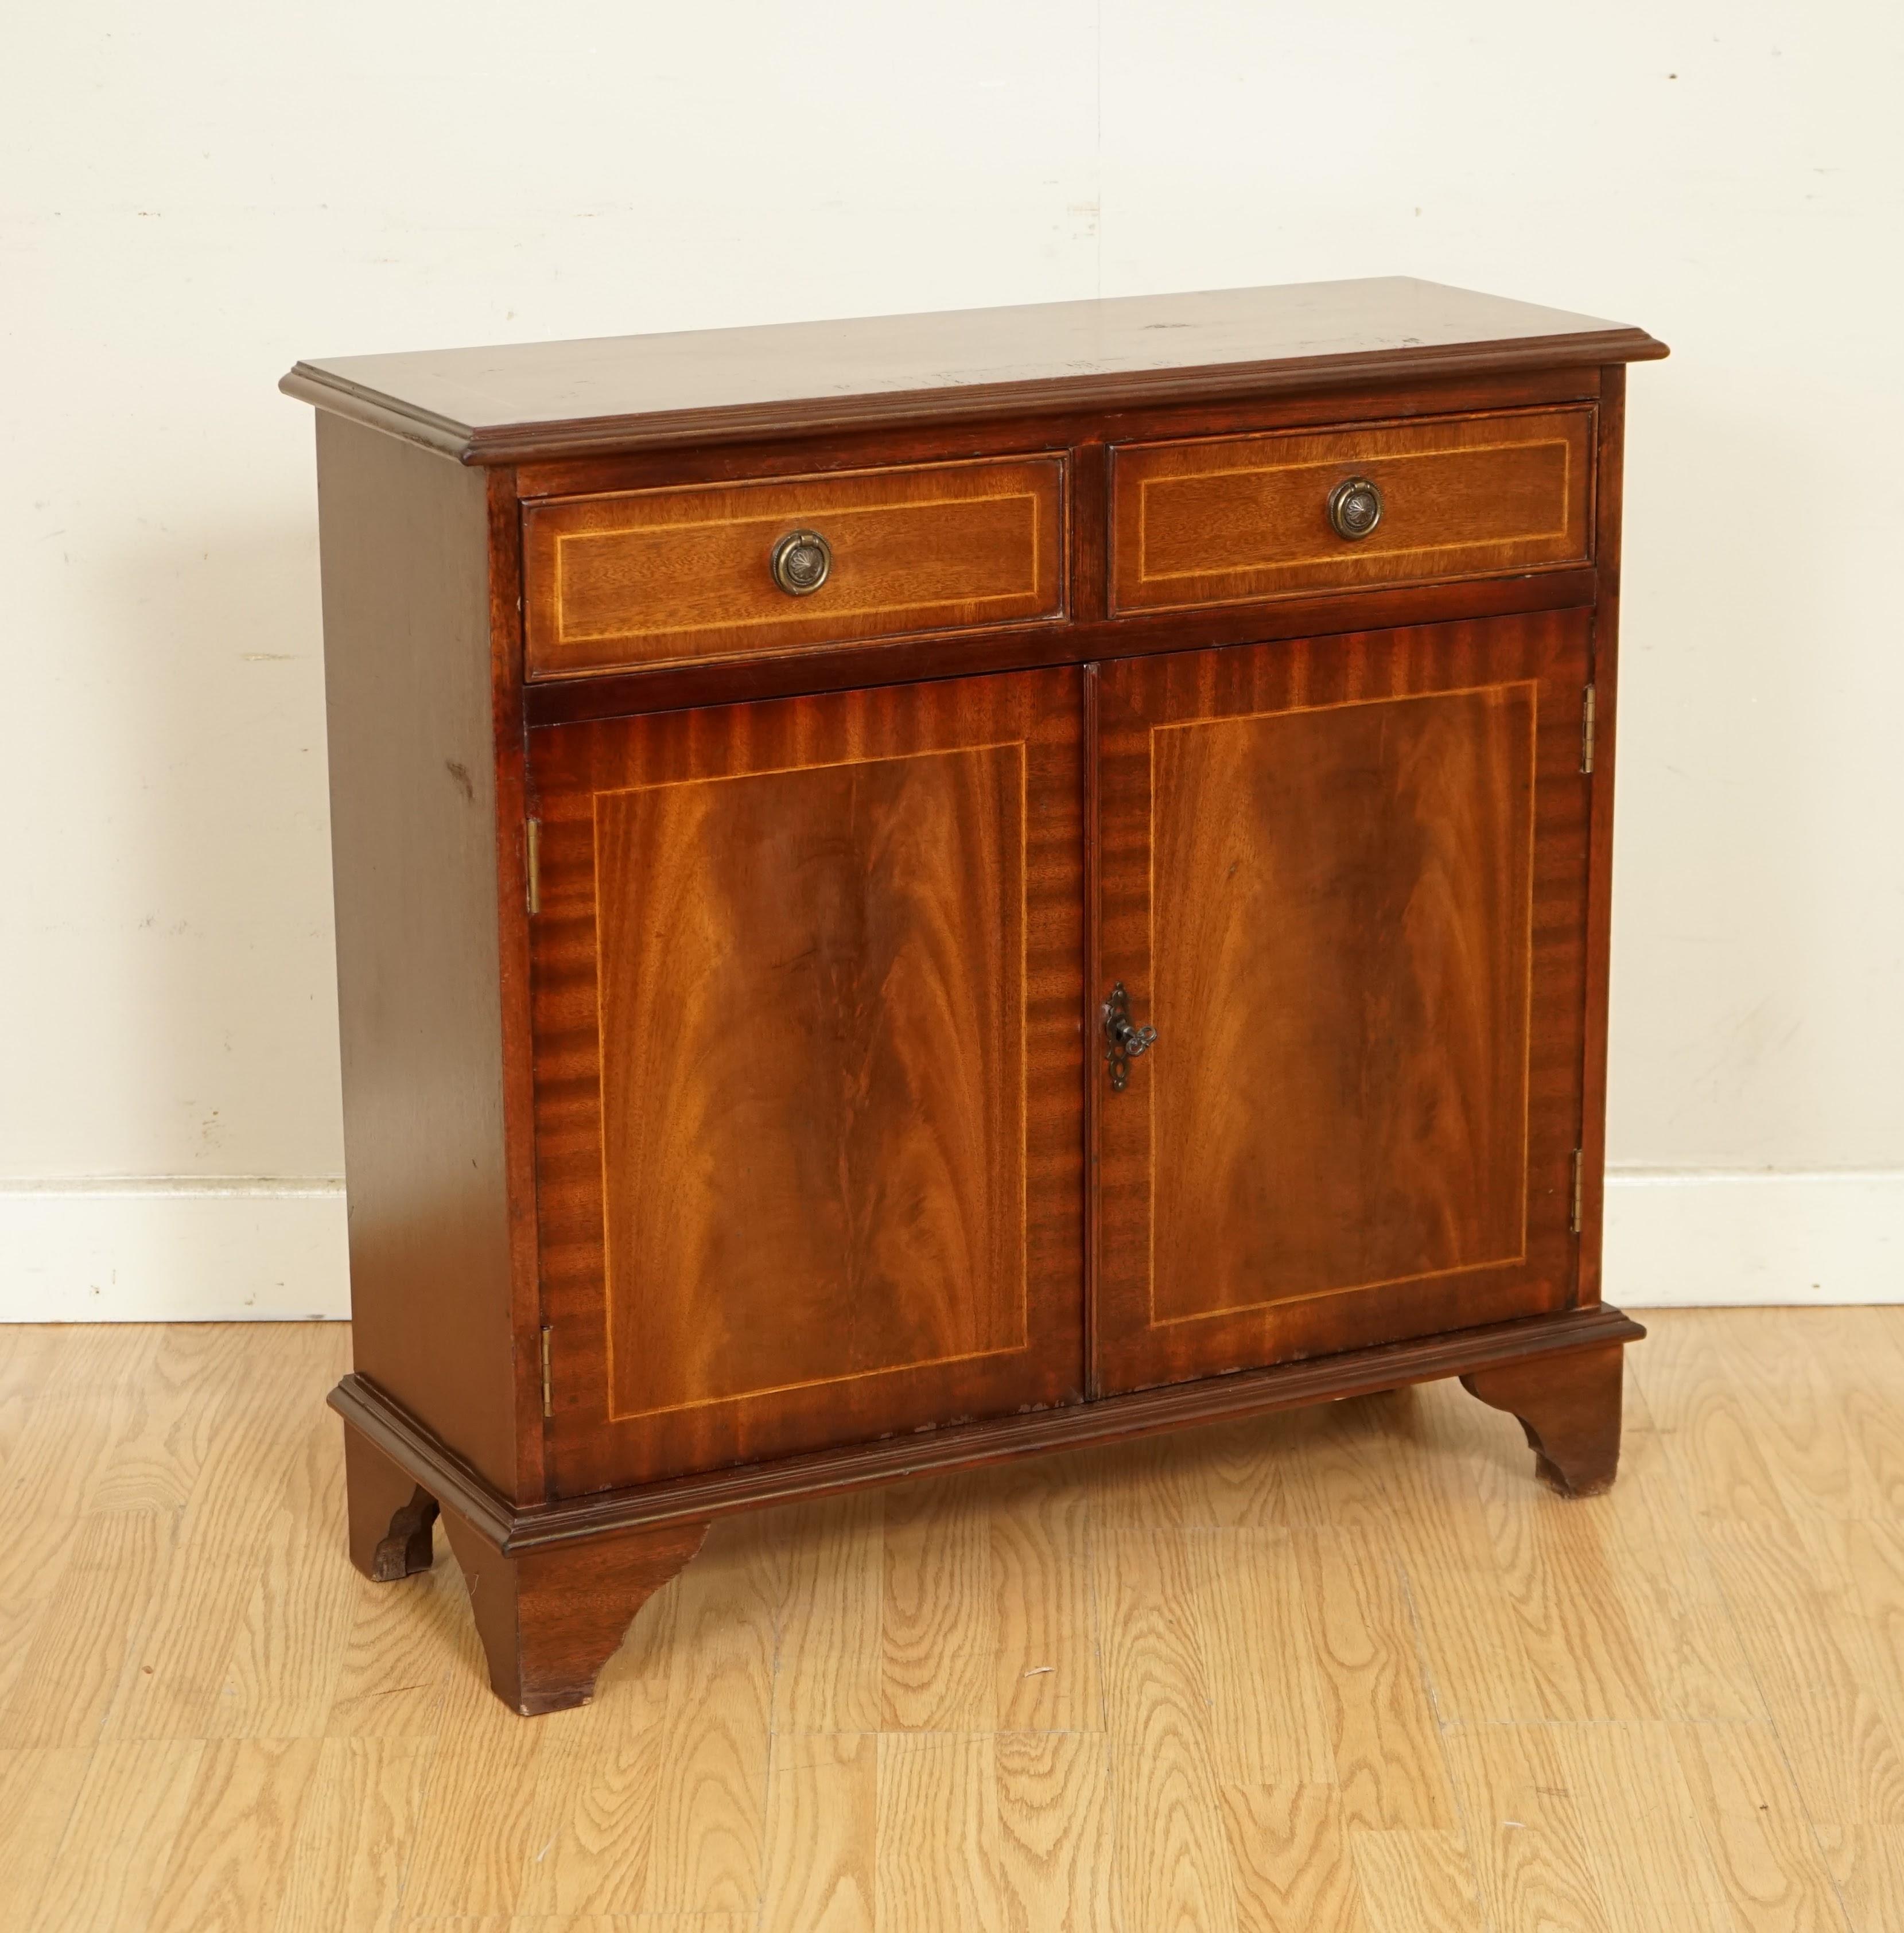 We are so excited to present to you this vintage mahogany dwarf bookcase.

We have lightly restored this by giving it a hand clean all over, hand waxed and hand polish. 

Please carefully look at the pictures to see the condition before